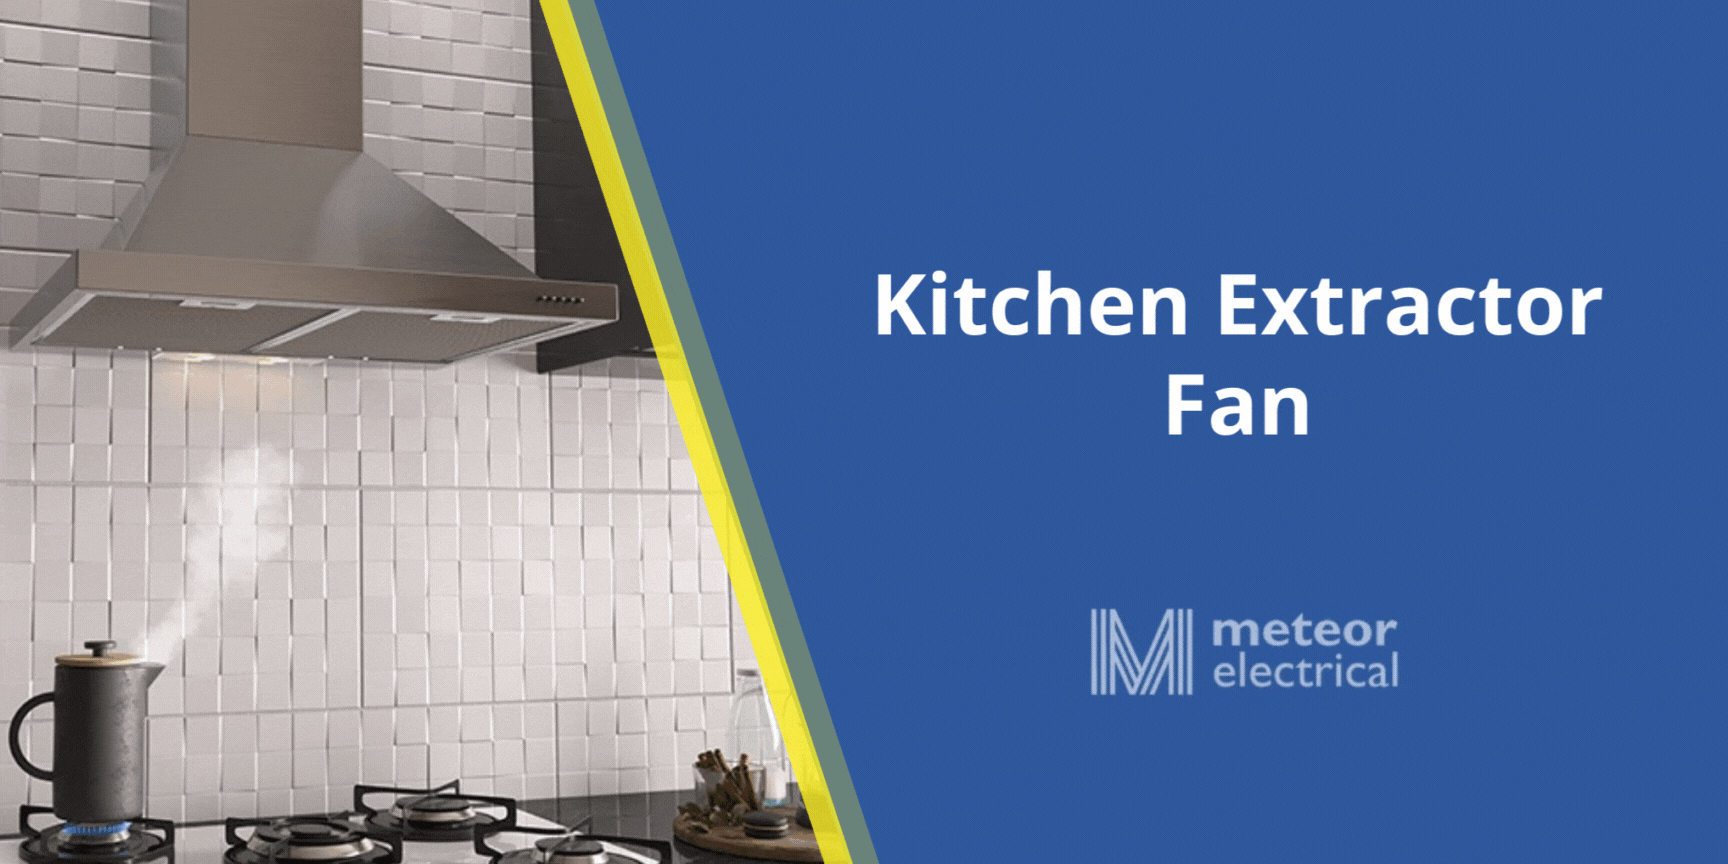 Kitchen Extractor Fan - Everything You Need To Know